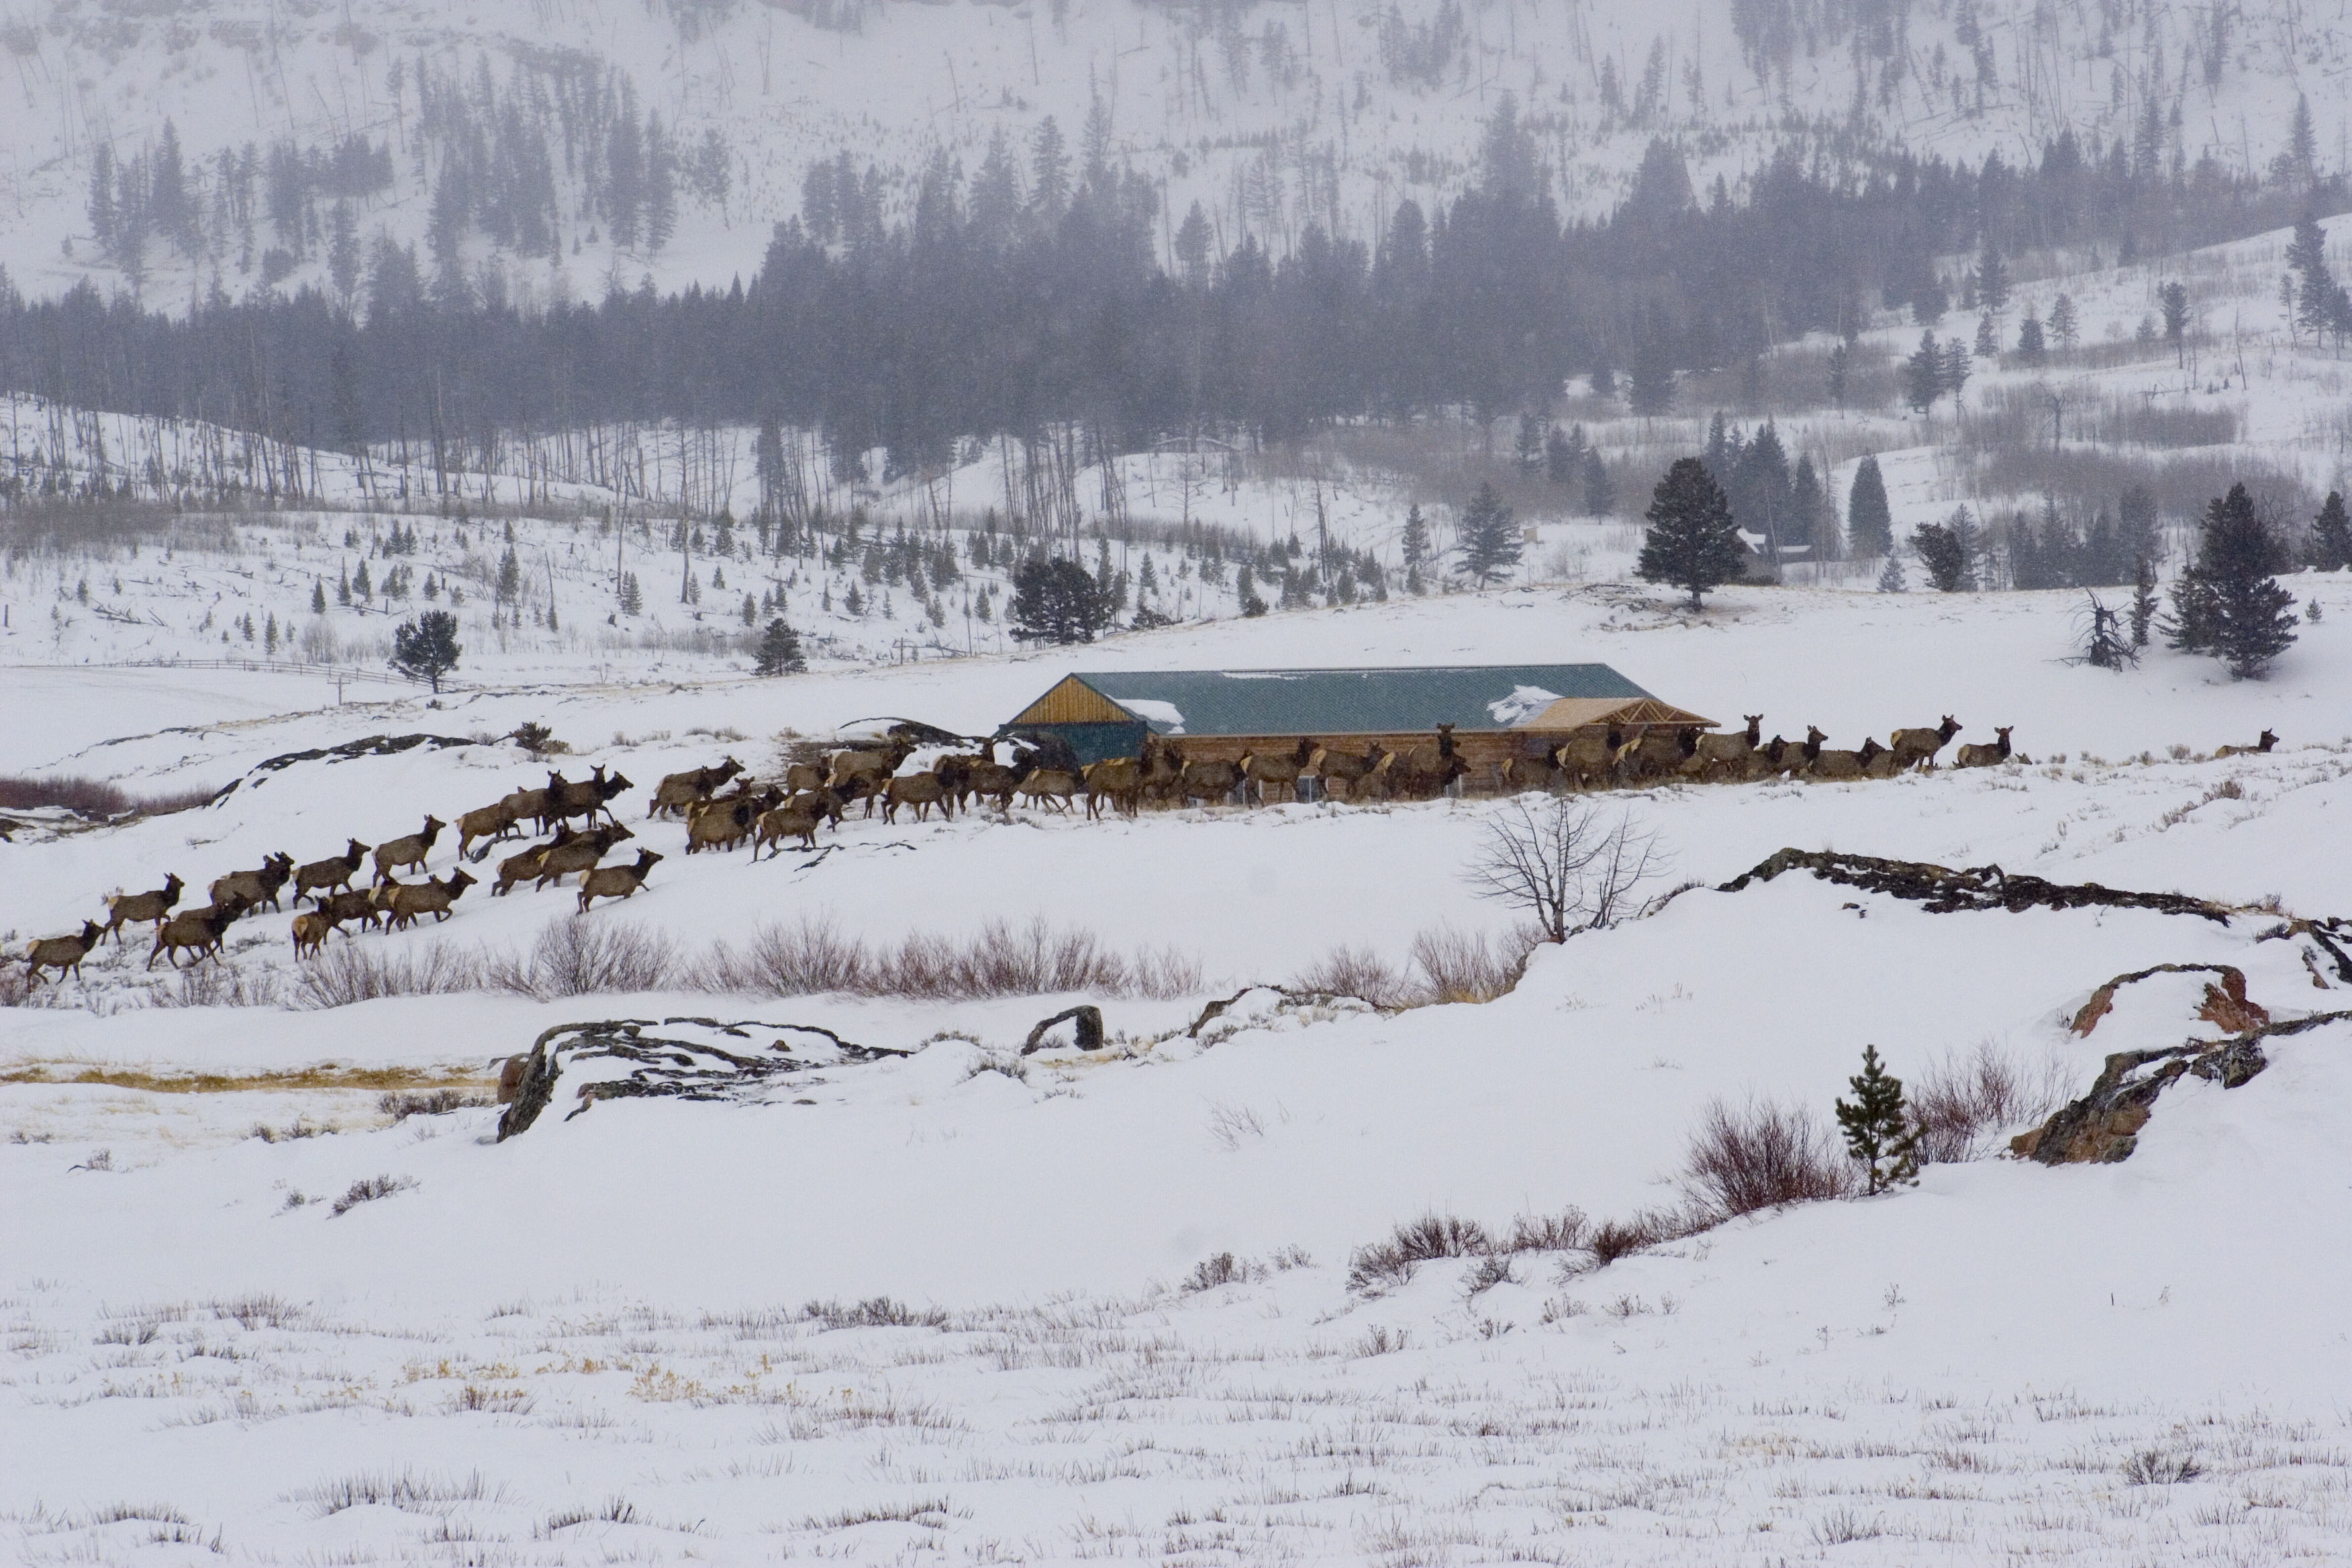 The interaction between wildlife and human presence is ubiquitous in Wyoming and the west.